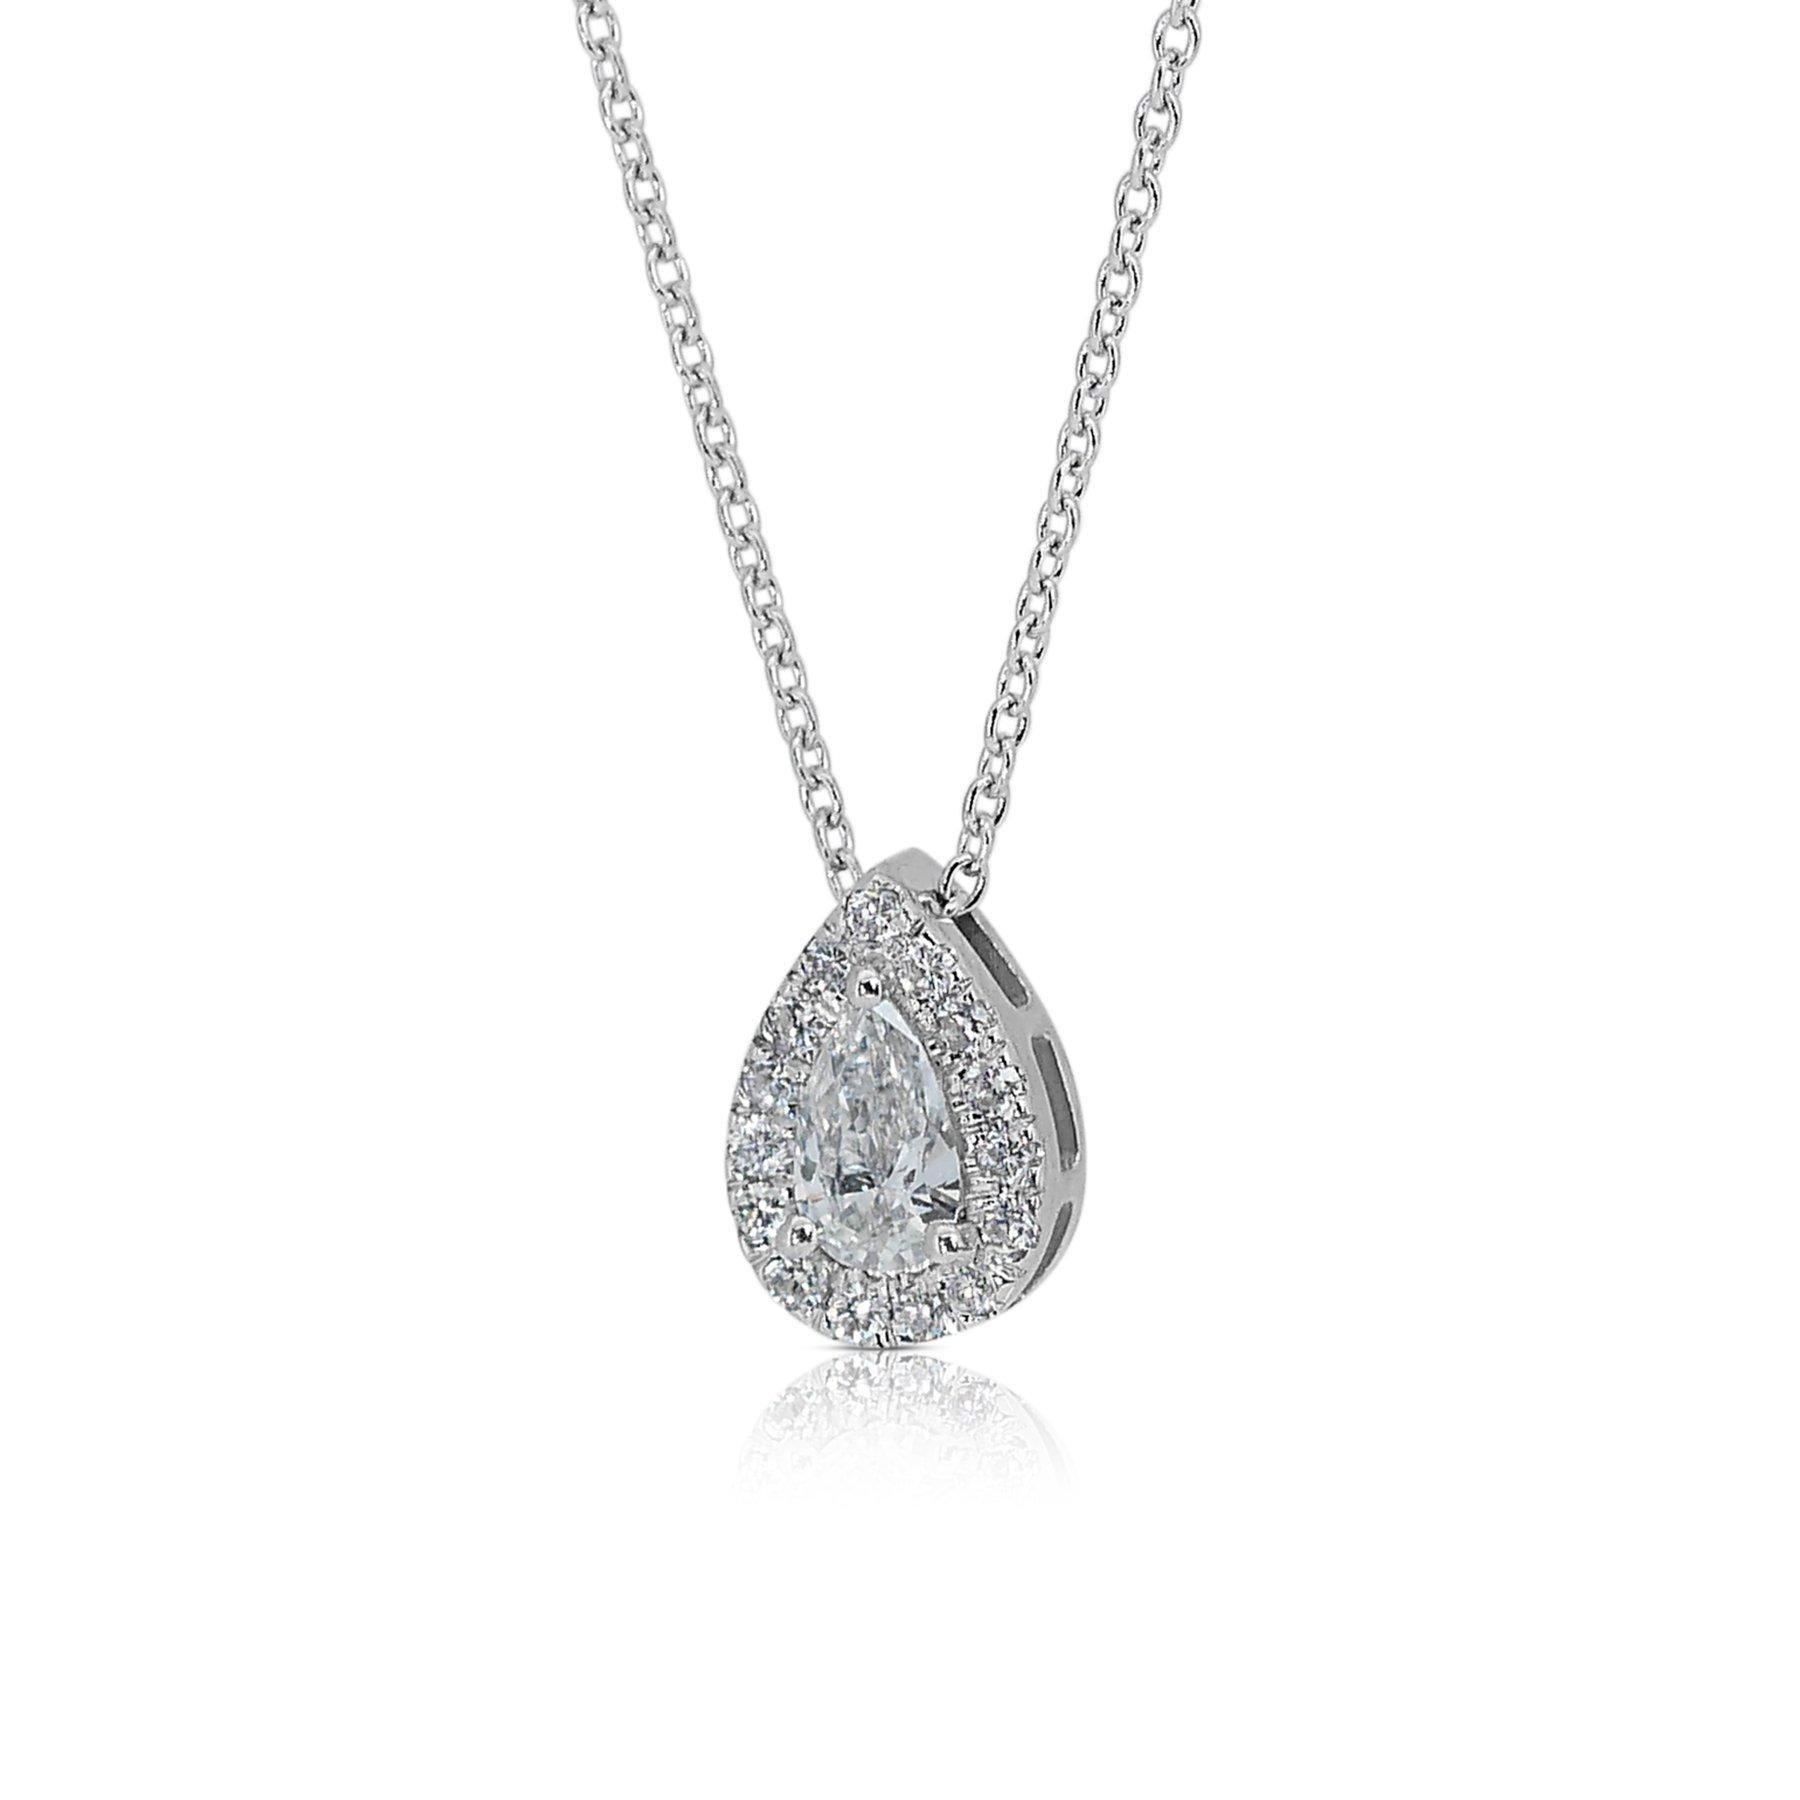 Women's Exquisite Necklace with a radiant 0.3ct Pear Shaped Natural Diamond